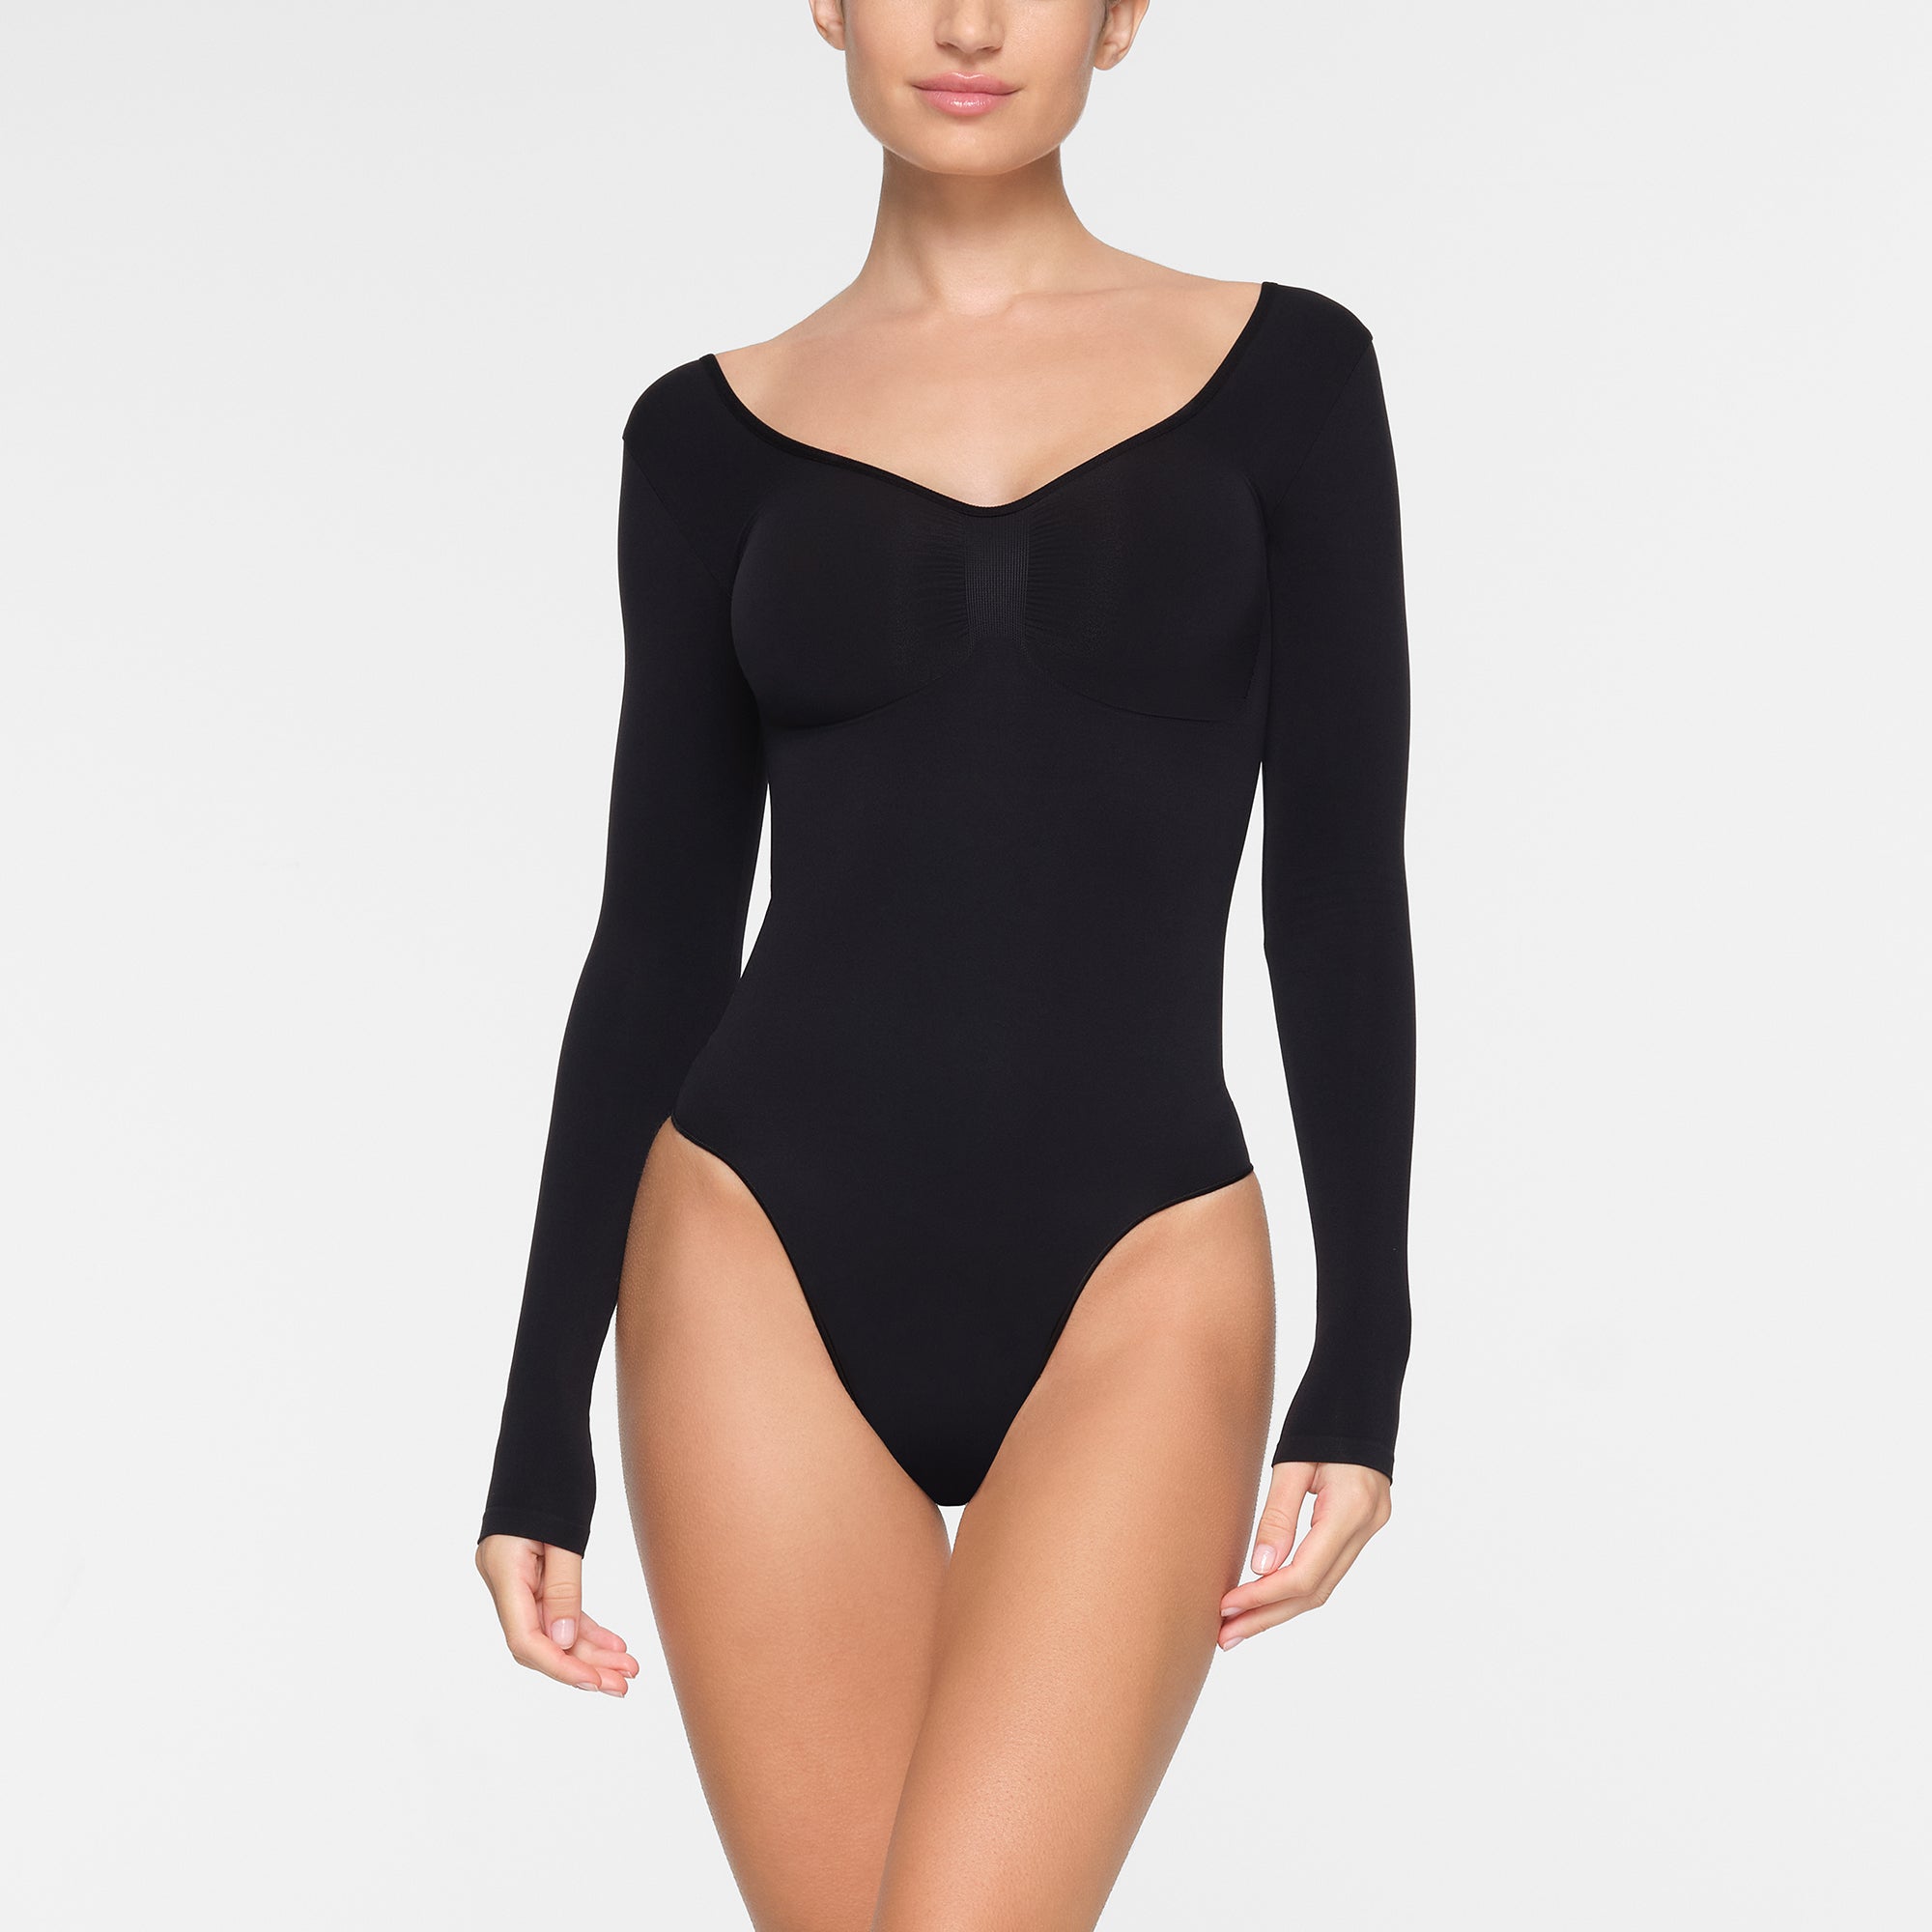 Seamless Skims shapewear bodysuit Full body front and back coverage - Black, Shop Today. Get it Tomorrow!